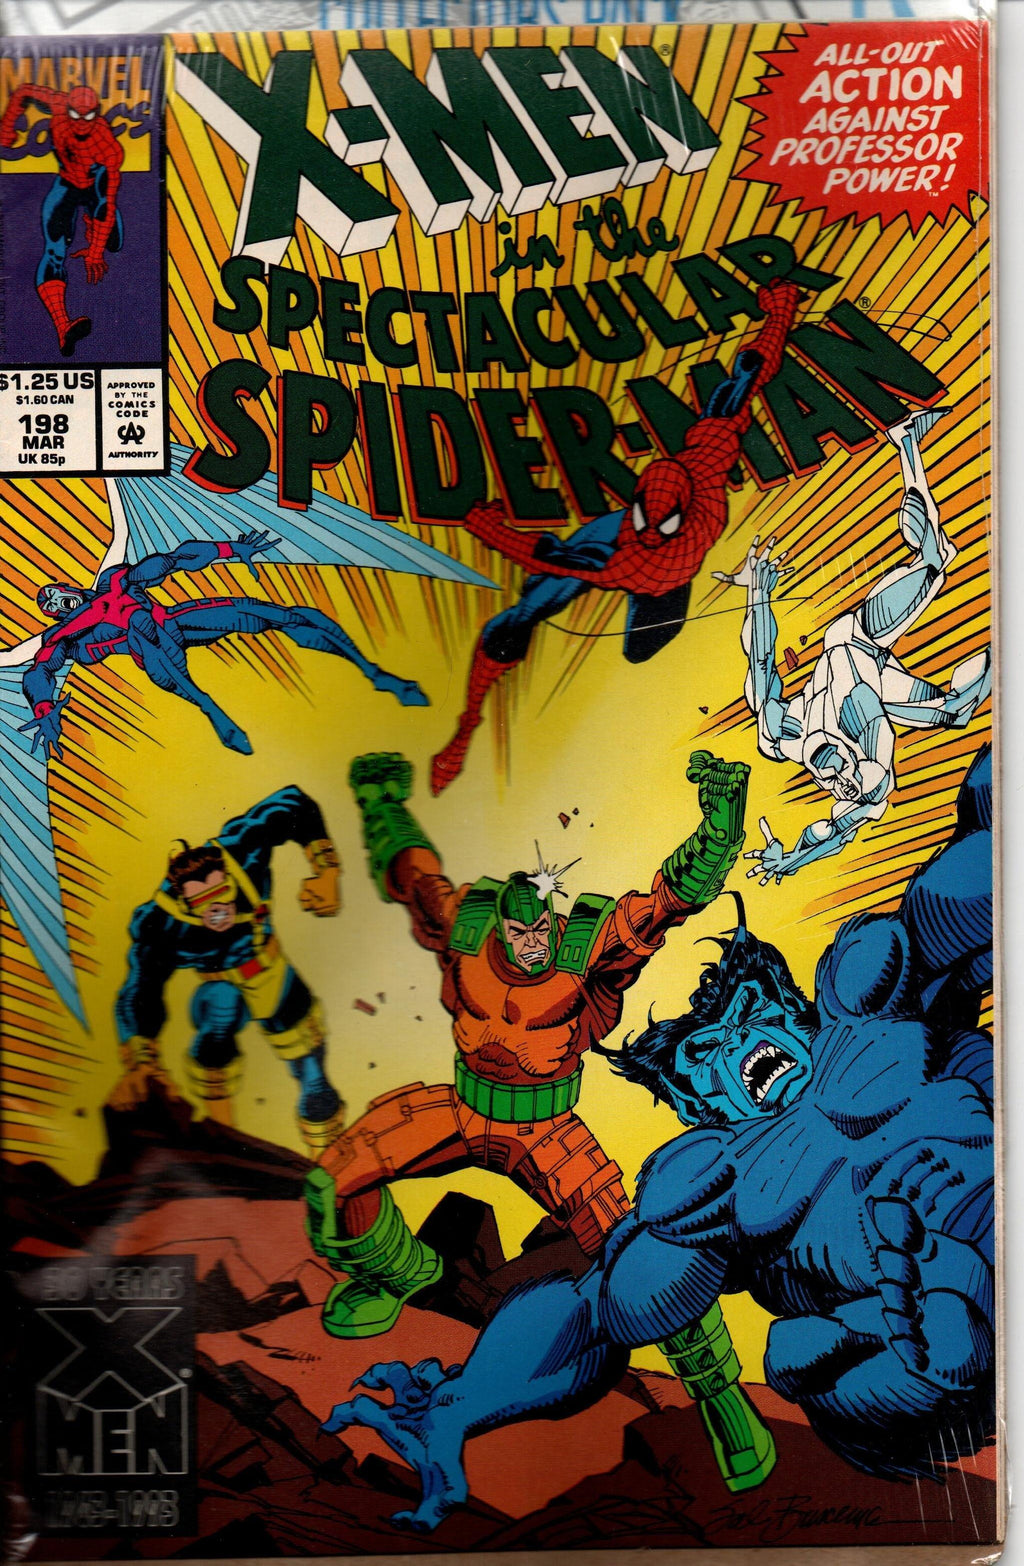 THE SPECTACULAR SPIDER-MAN #198 (1976 1ST SERIES) MAR 1993